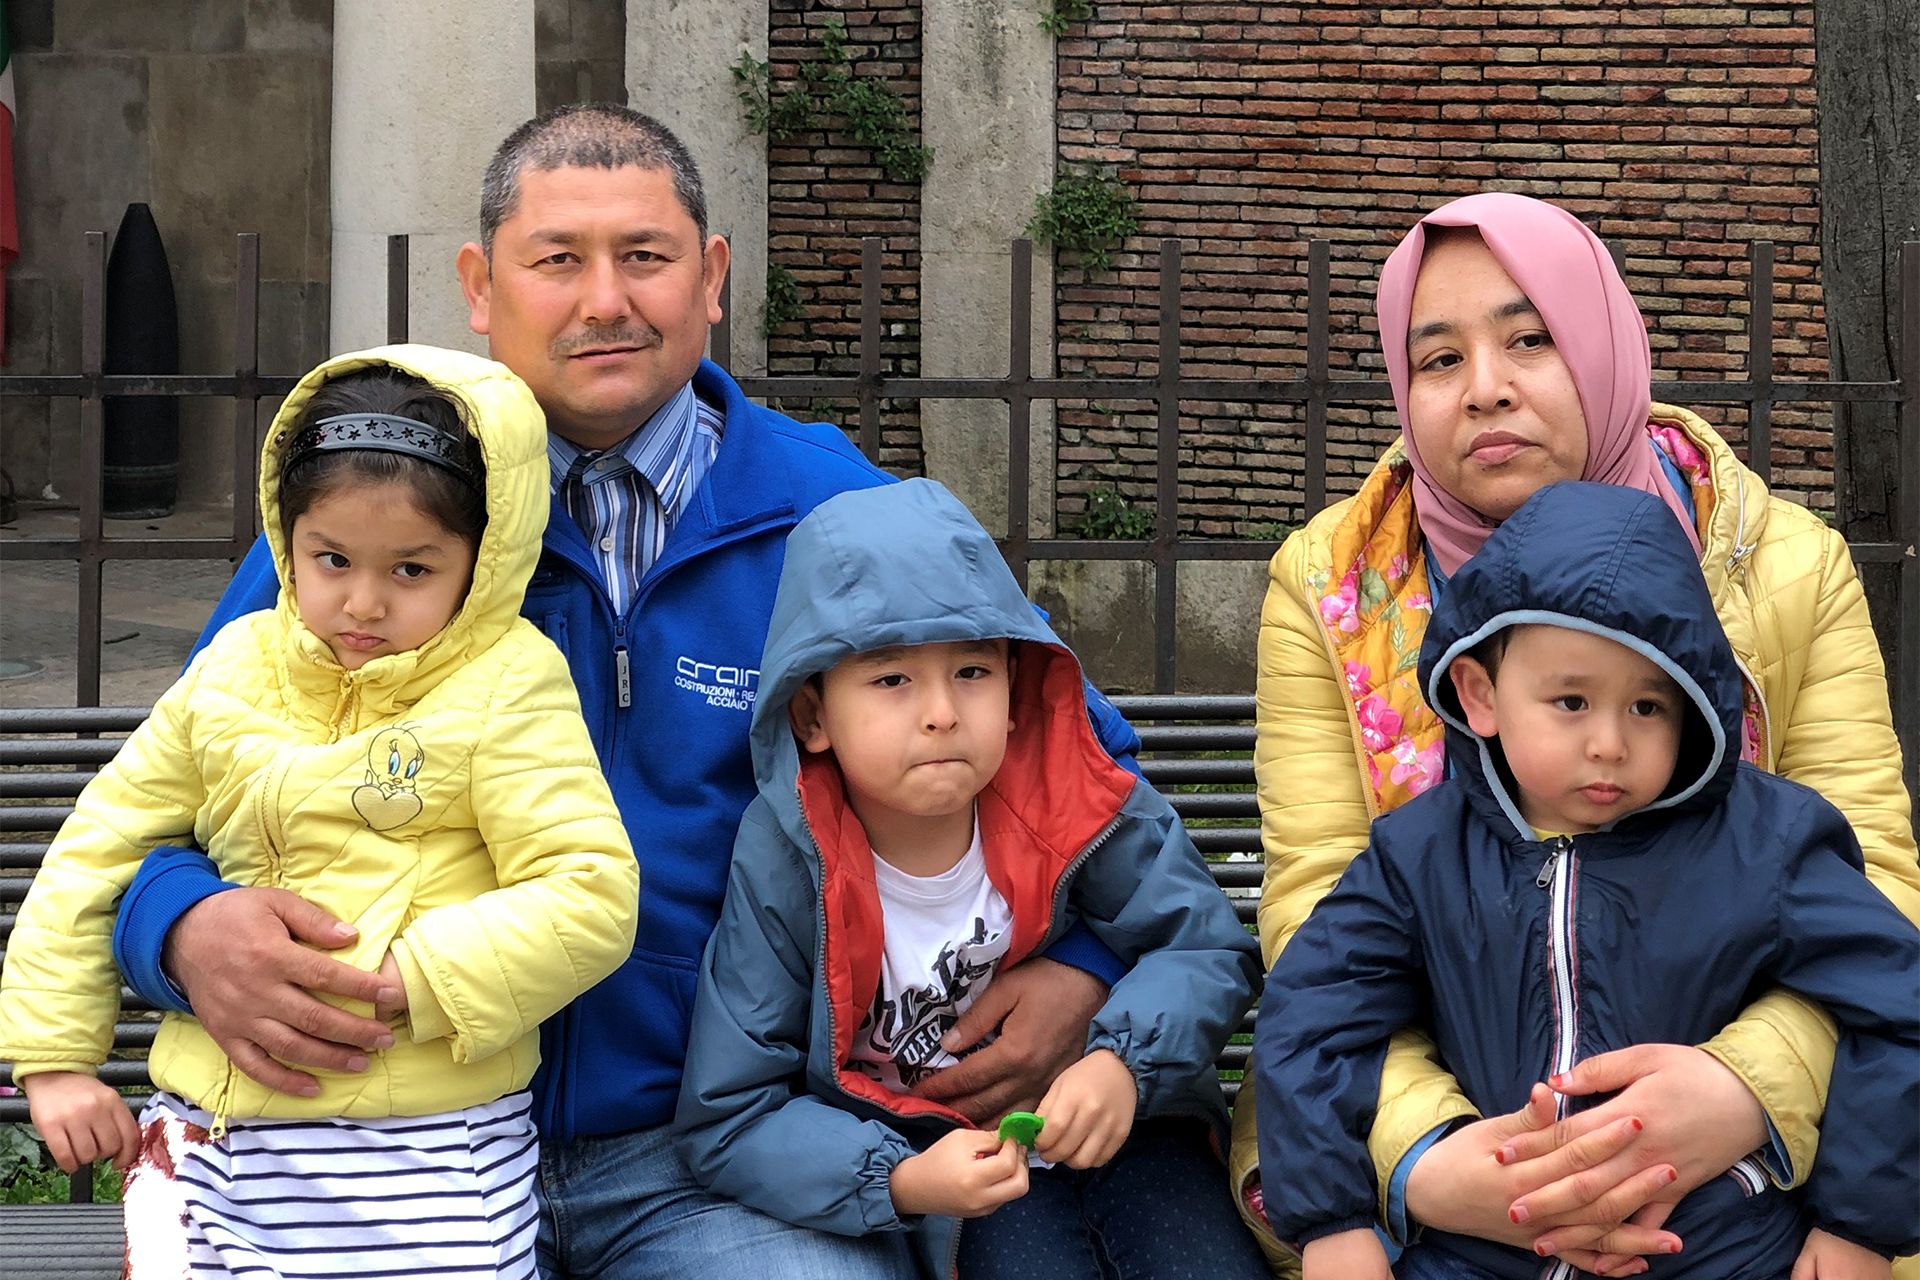 china calls these uyghur parents 'terrorists' without evidence.